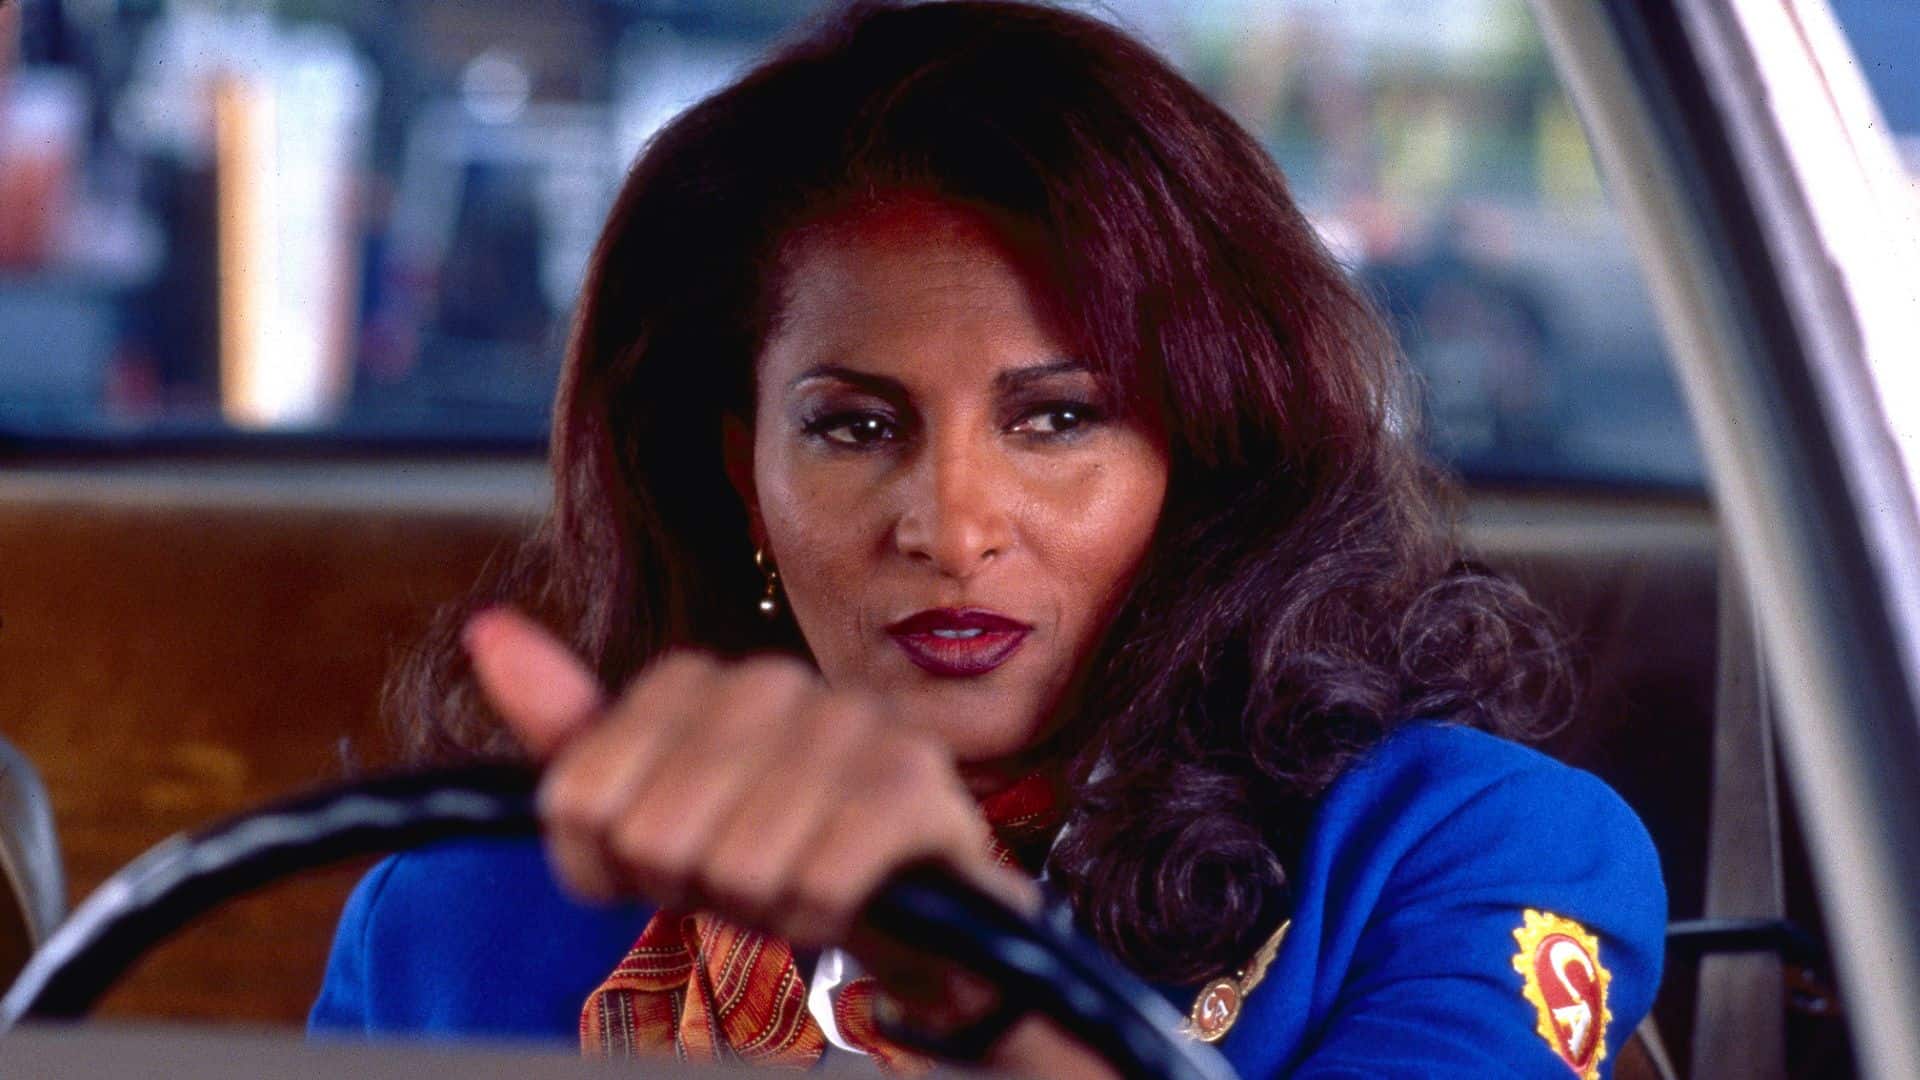 Jackie Brown driving a car in her flight attendant uniform in this image from Tubi